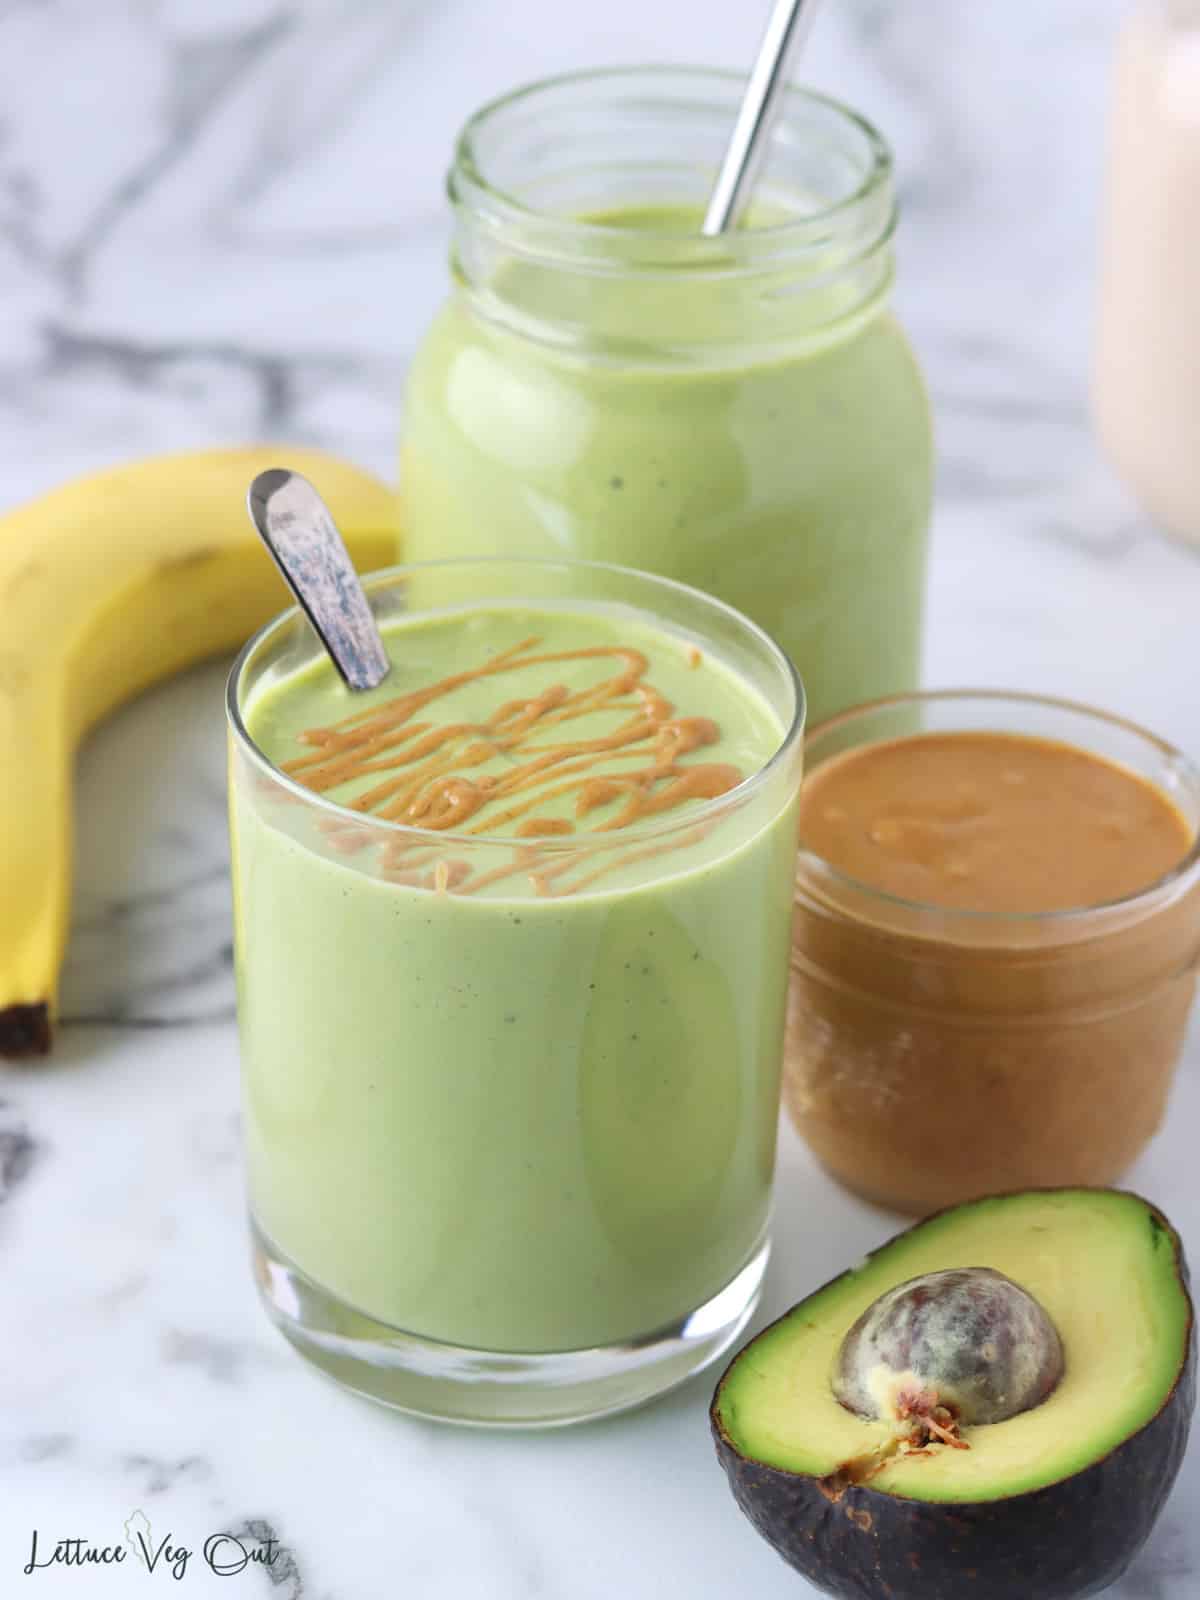 Two glass of green smoothie with metal straws and peanut butter drizzle on one smoothie with banana, peanut butter and avocado decorating around glasses.